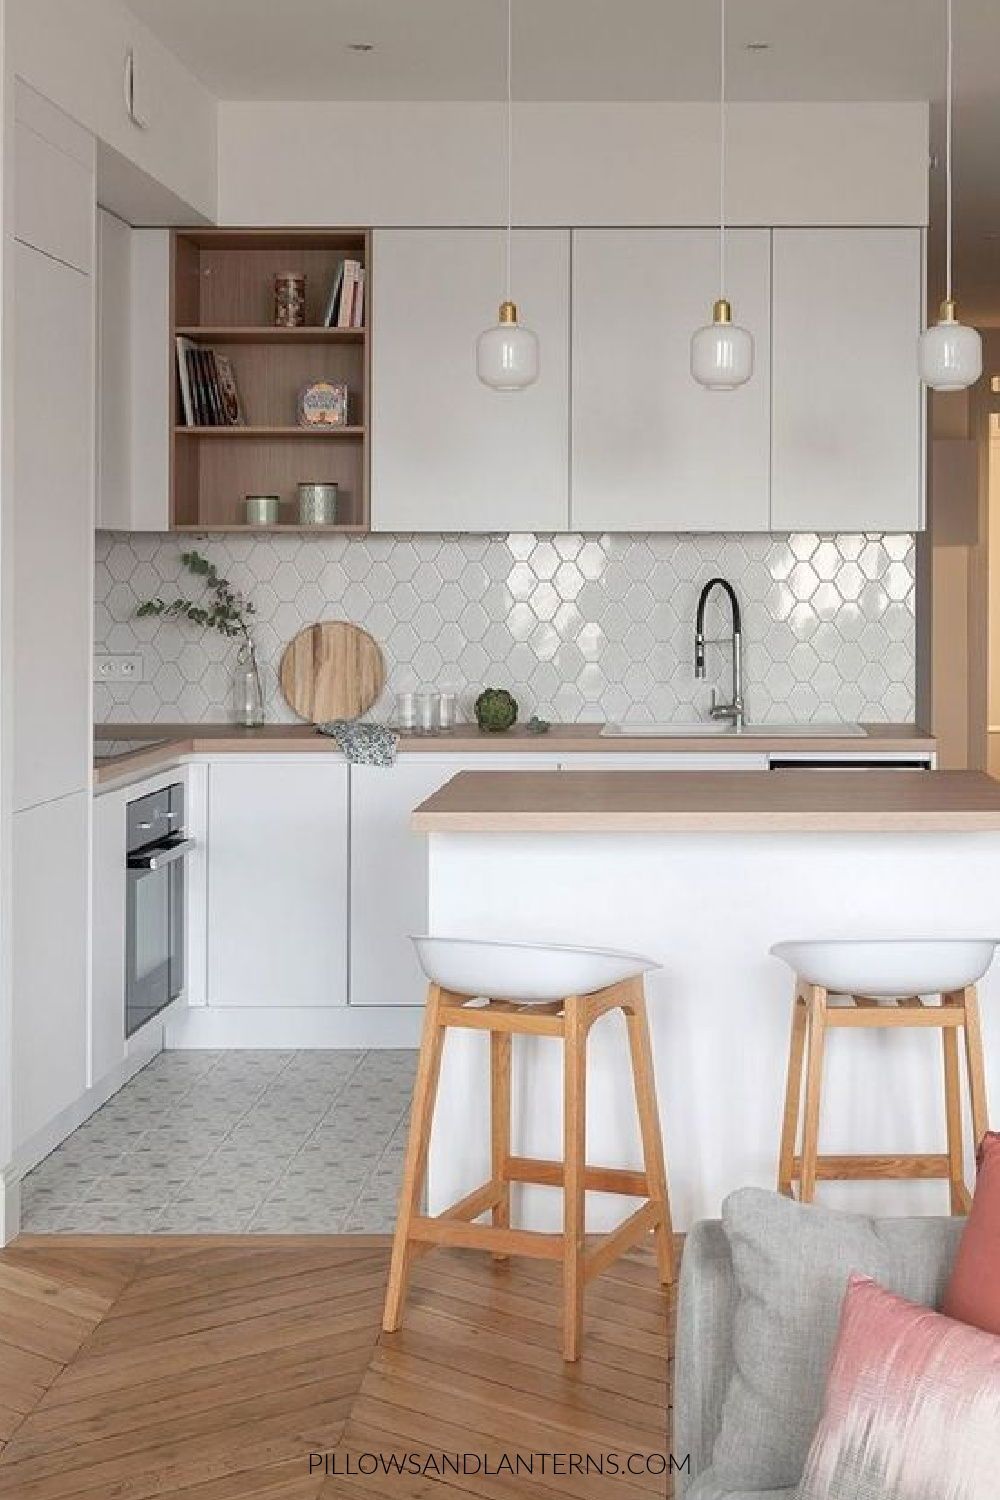 Embracing Neutrals: Timeless Kitchen Ideas for a Stylish Space